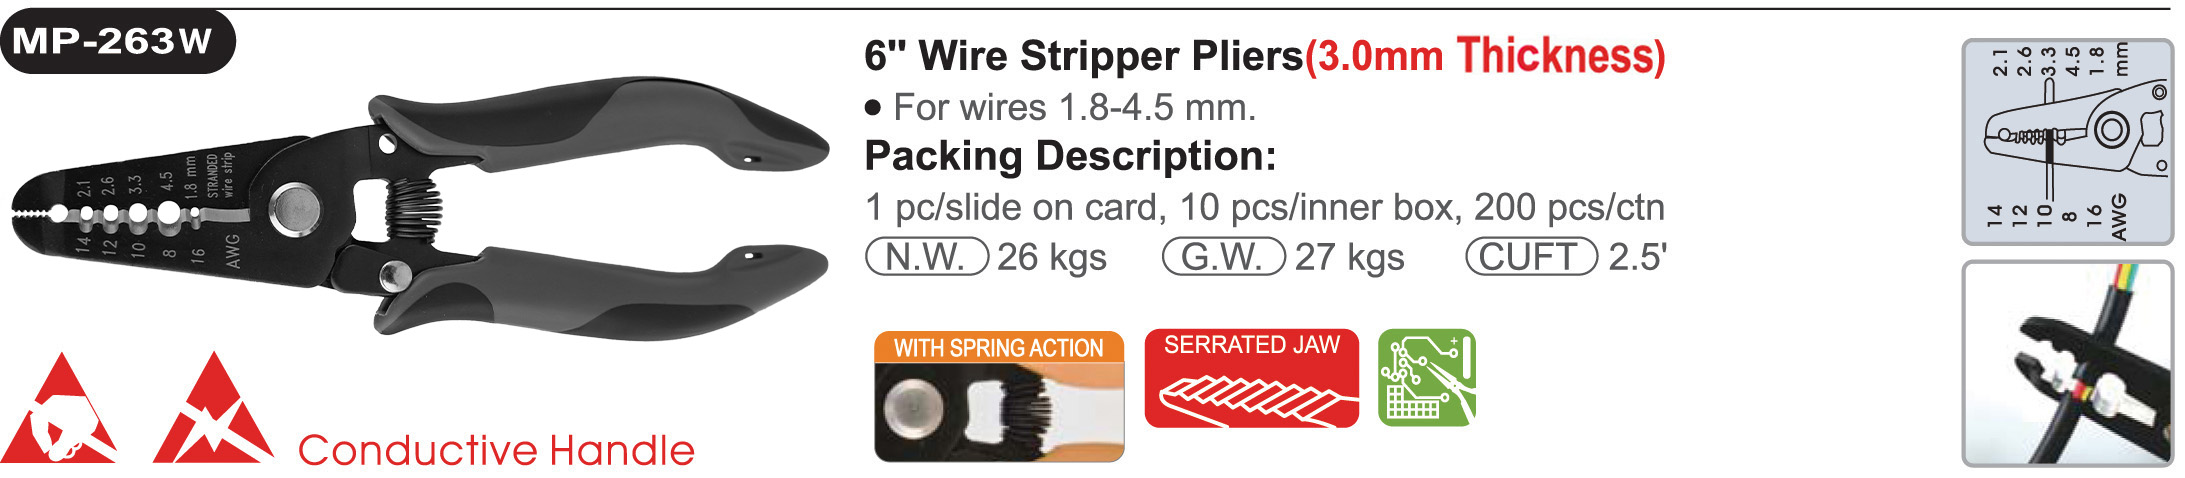 proimages/product/pliers/wire_strippers/ELECTRONICS_WIRE_STRIPPER_ESD/MP-263W/MP-263W.jpg